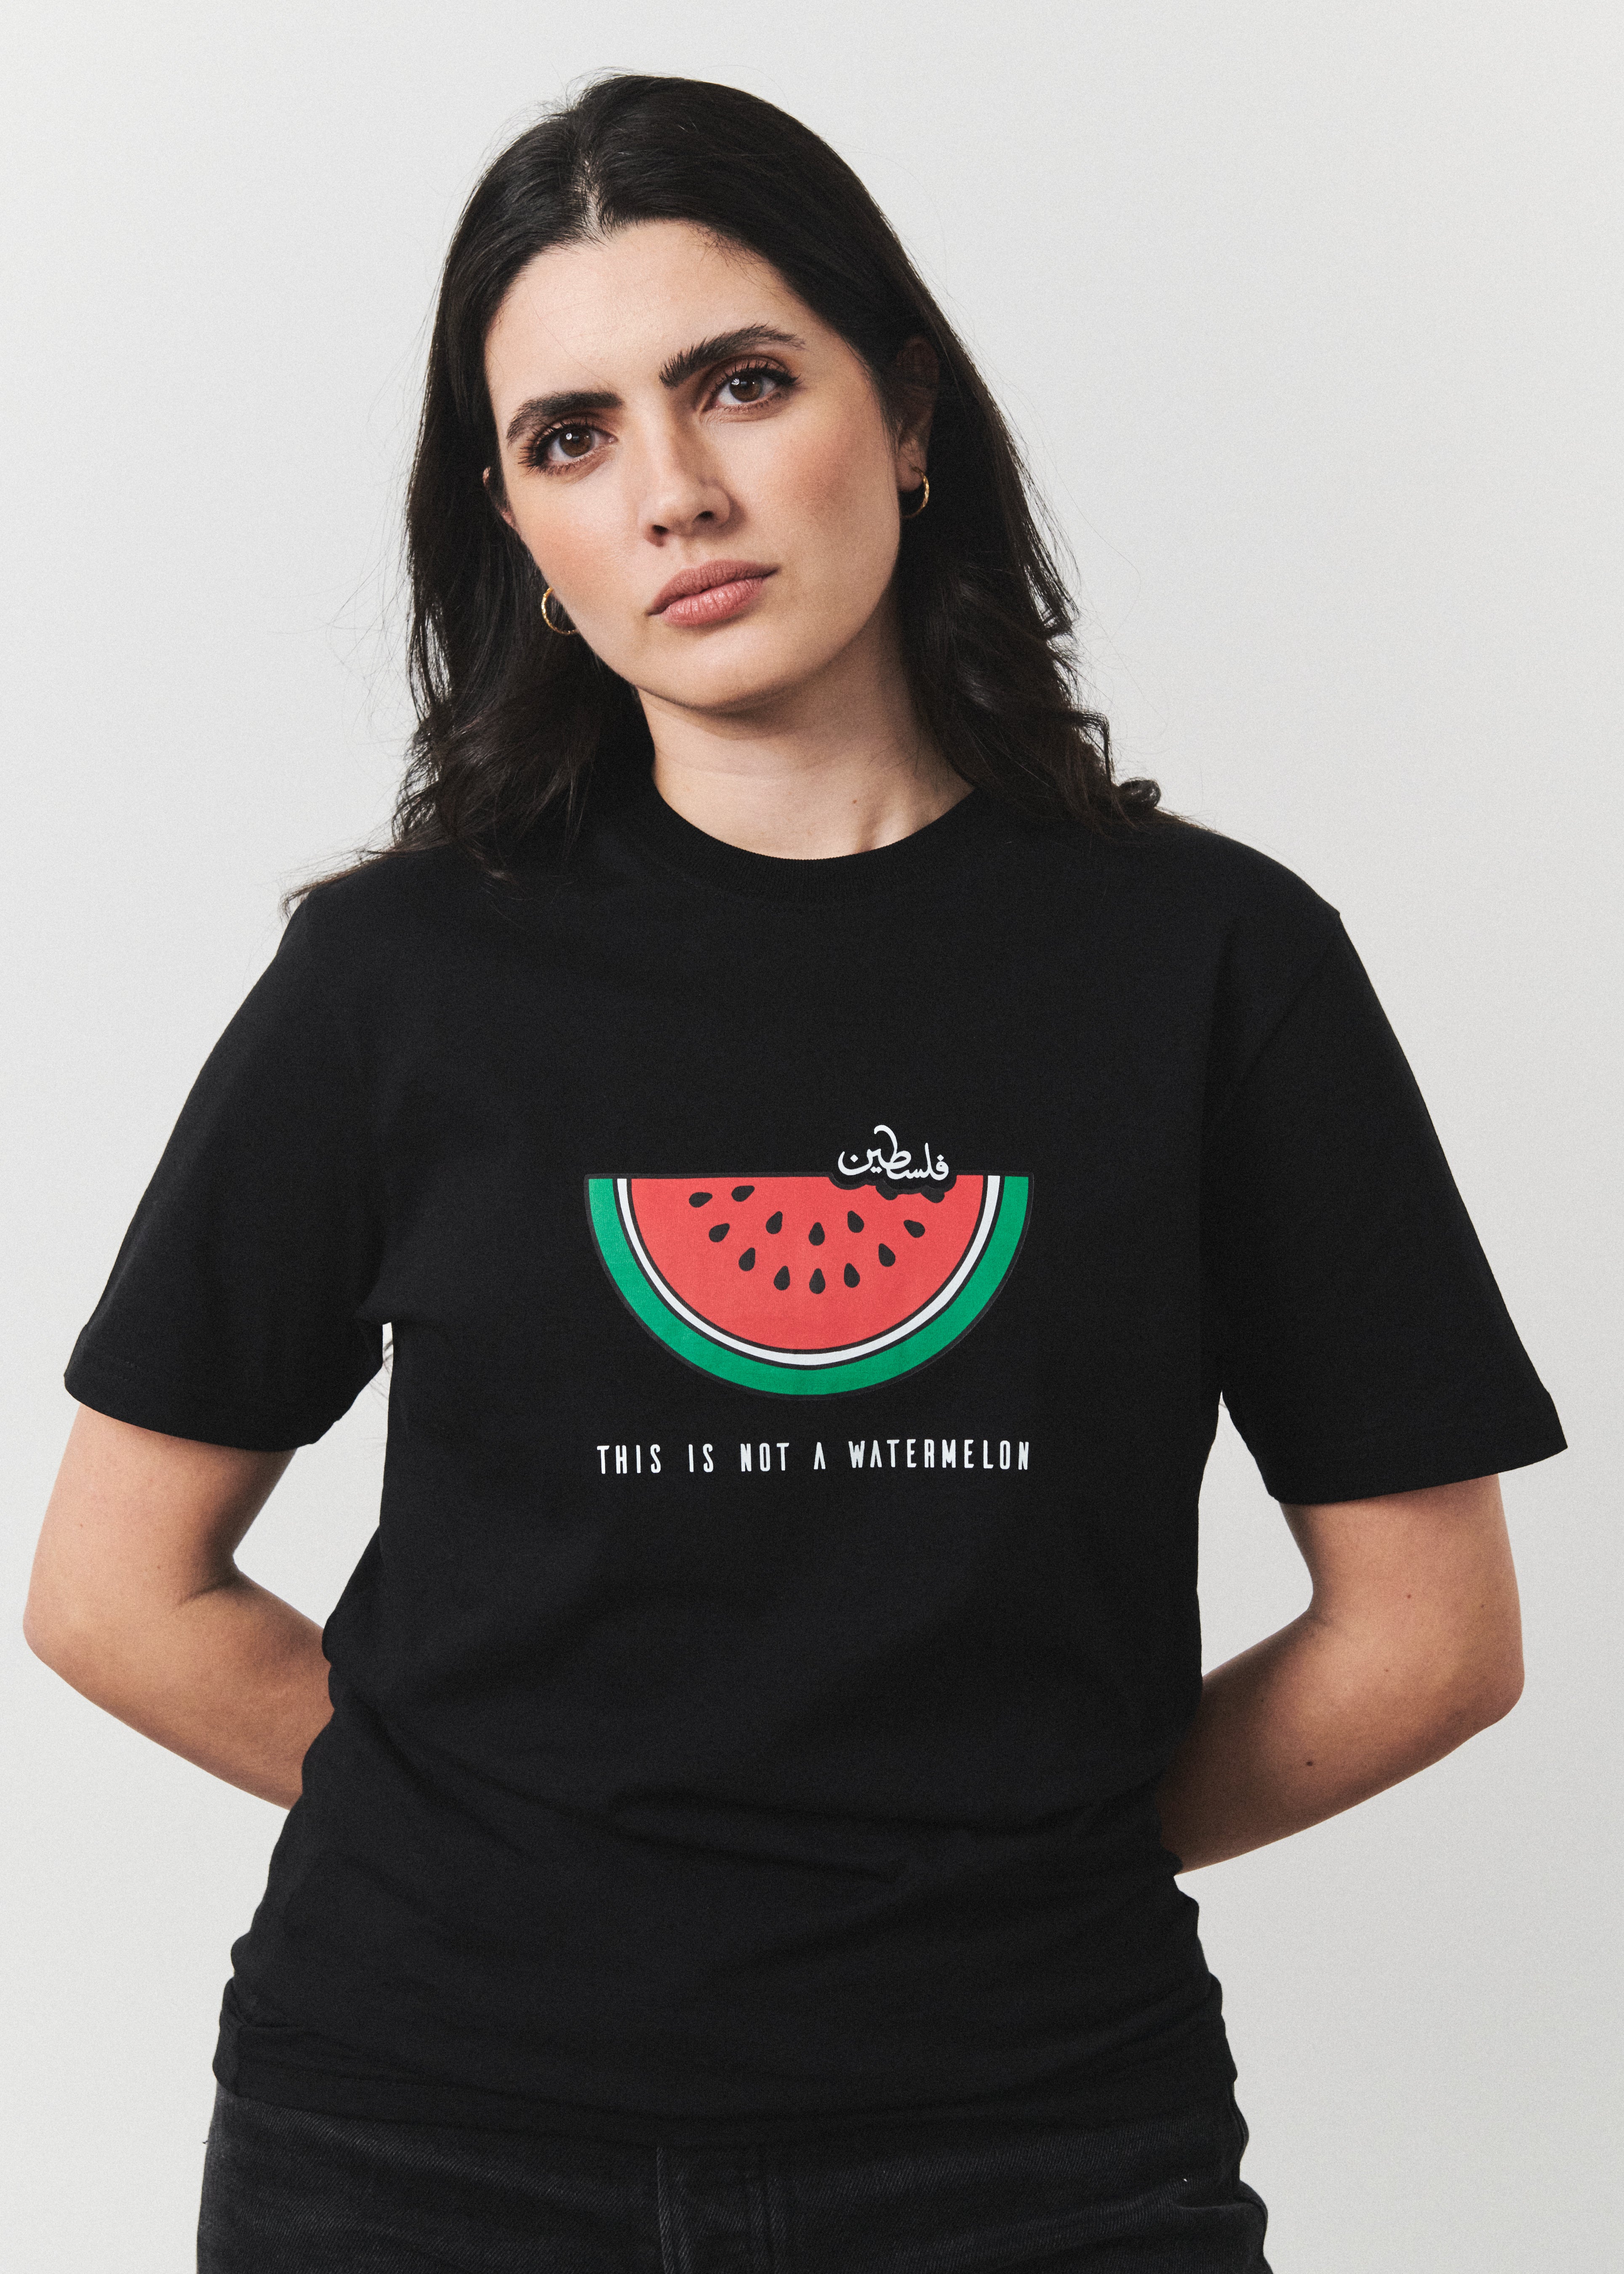 This is not a watermelon T-shirt